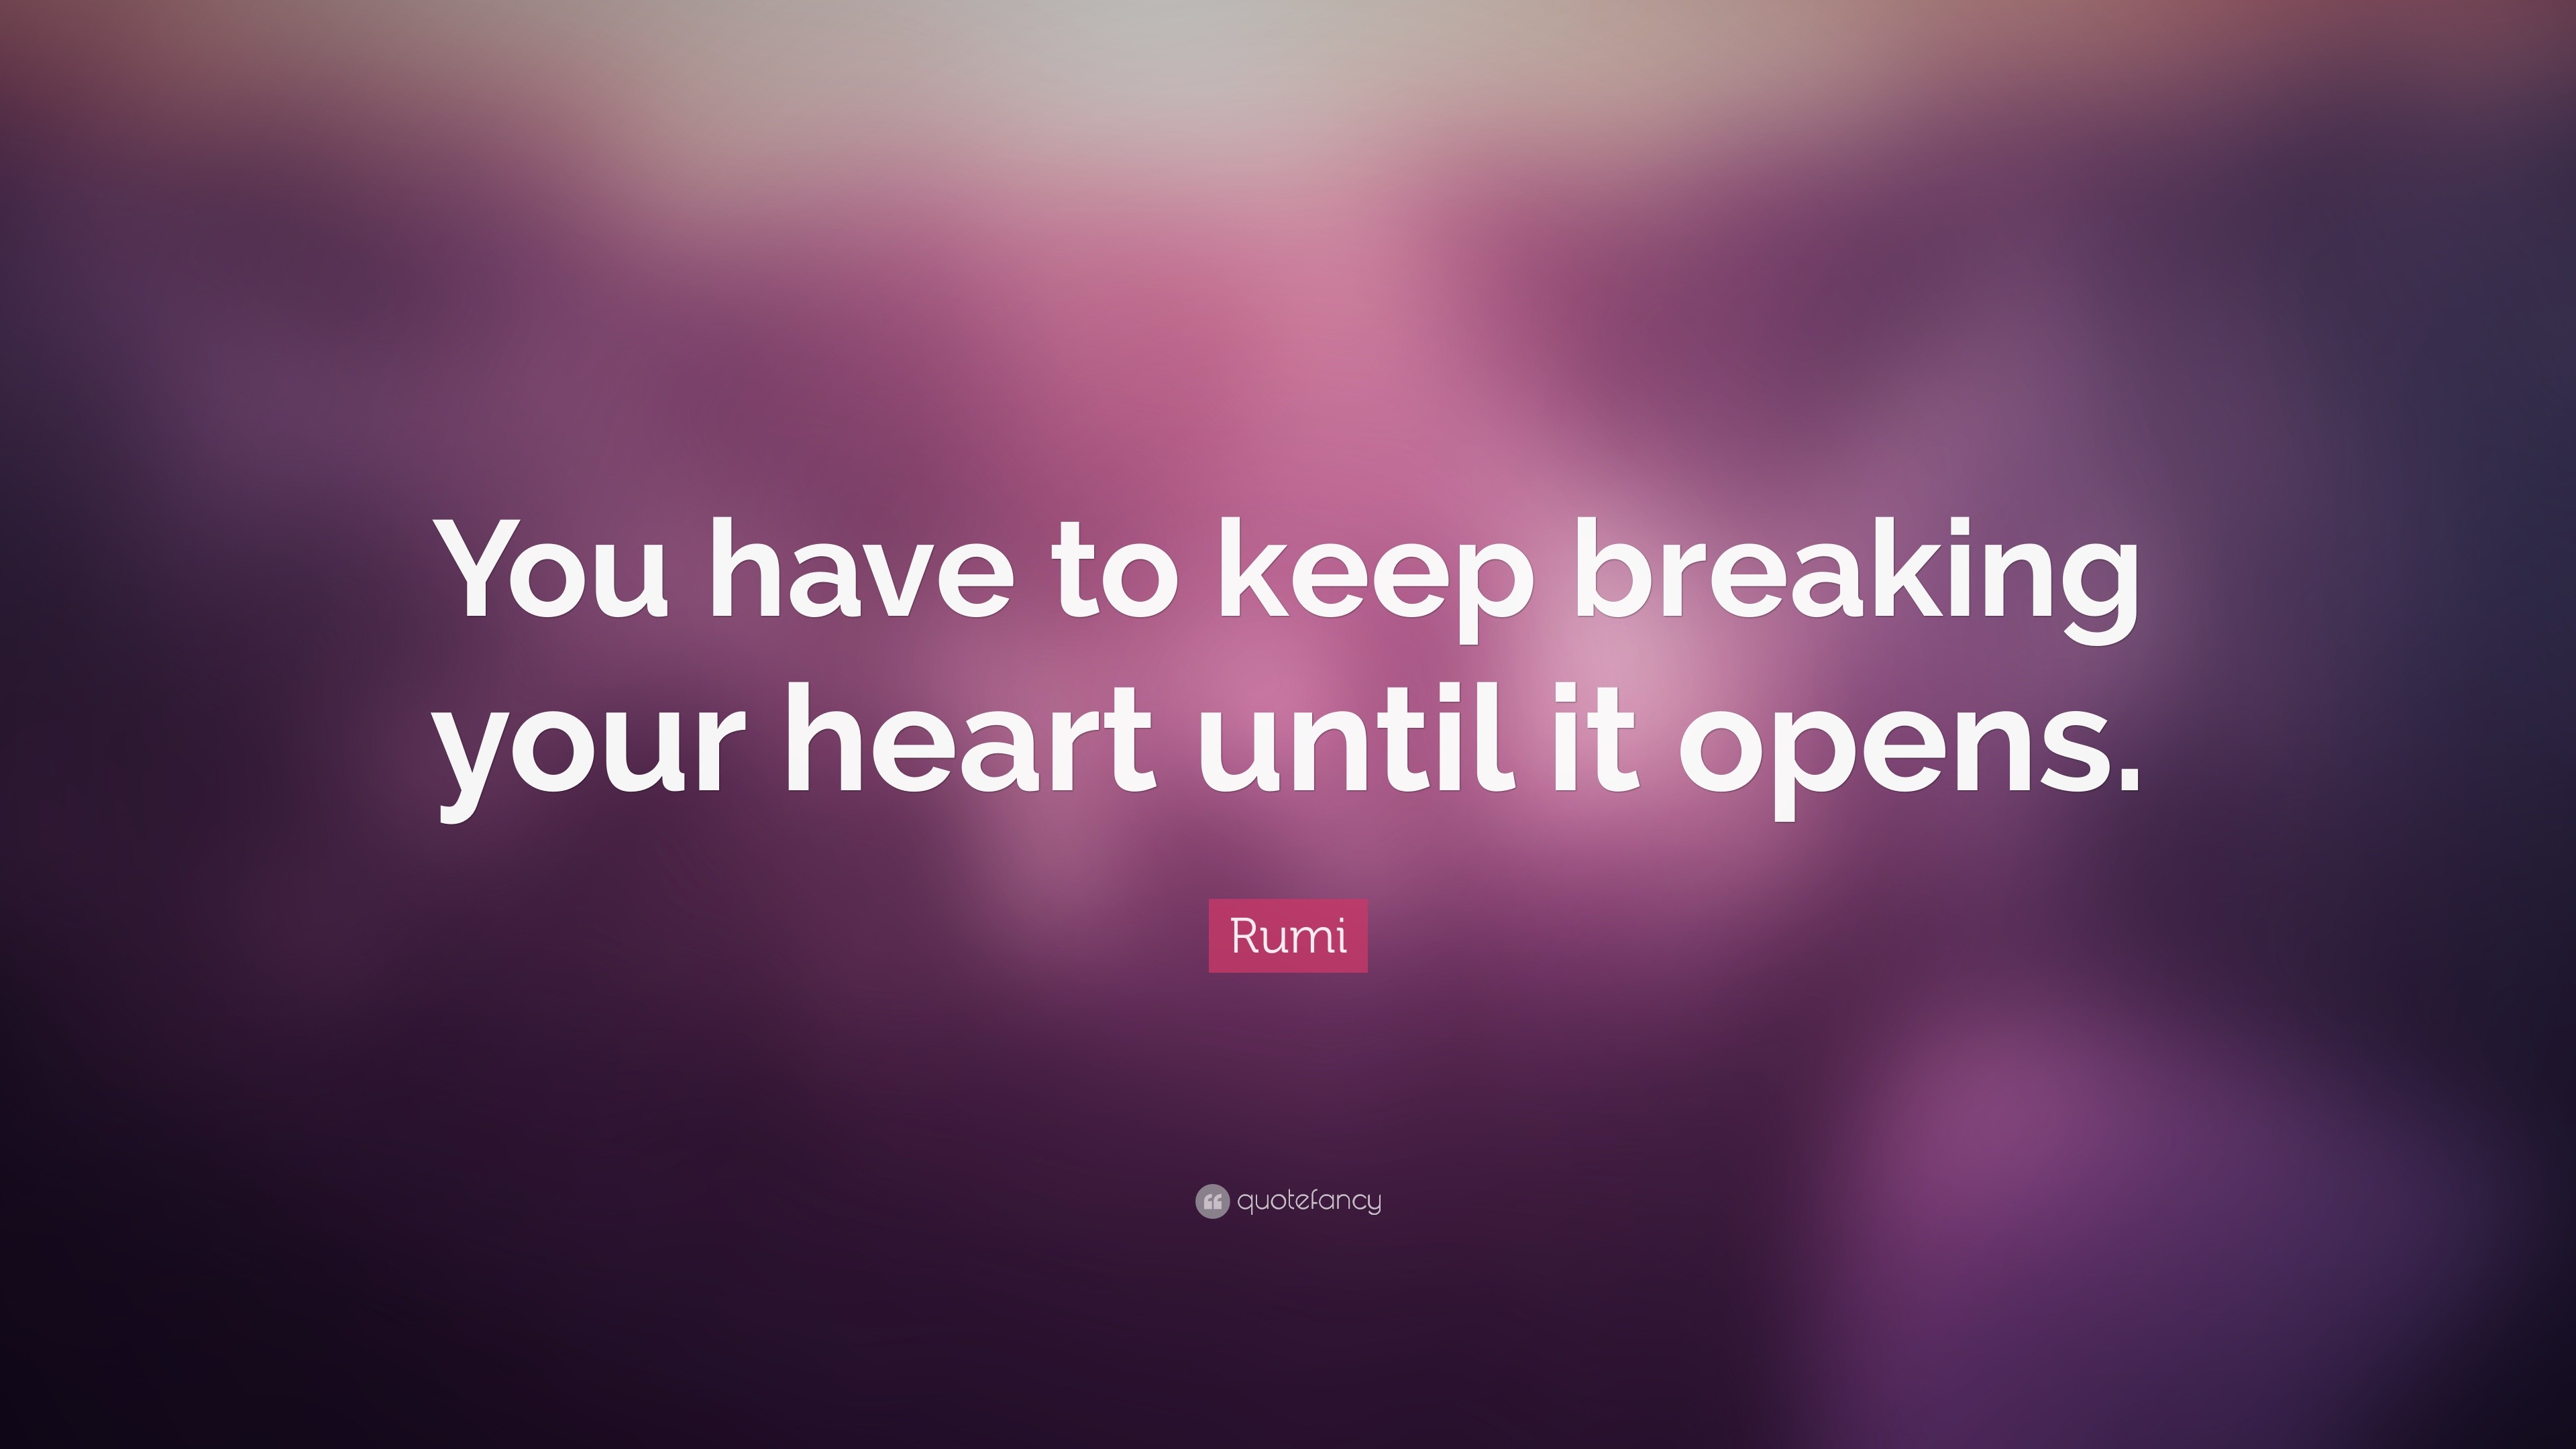 Rumi Quote: “You have to keep breaking your heart until it opens.”